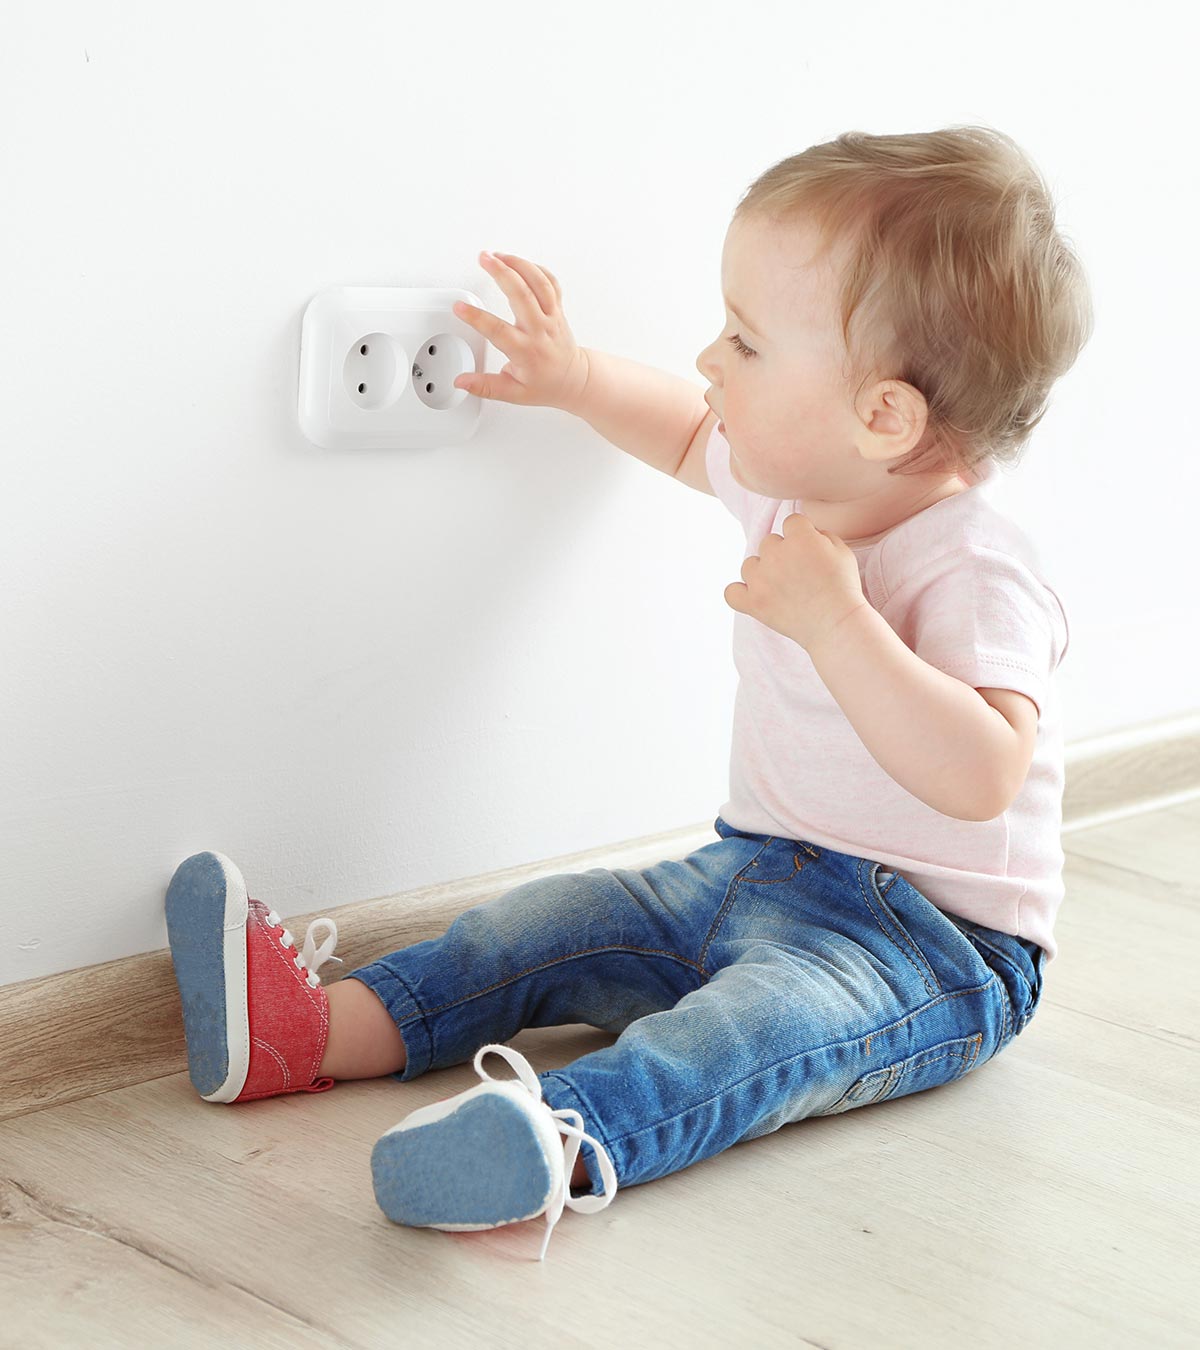 White Double Socket Protector Electric Plug Cover Safety Box for Baby Child 